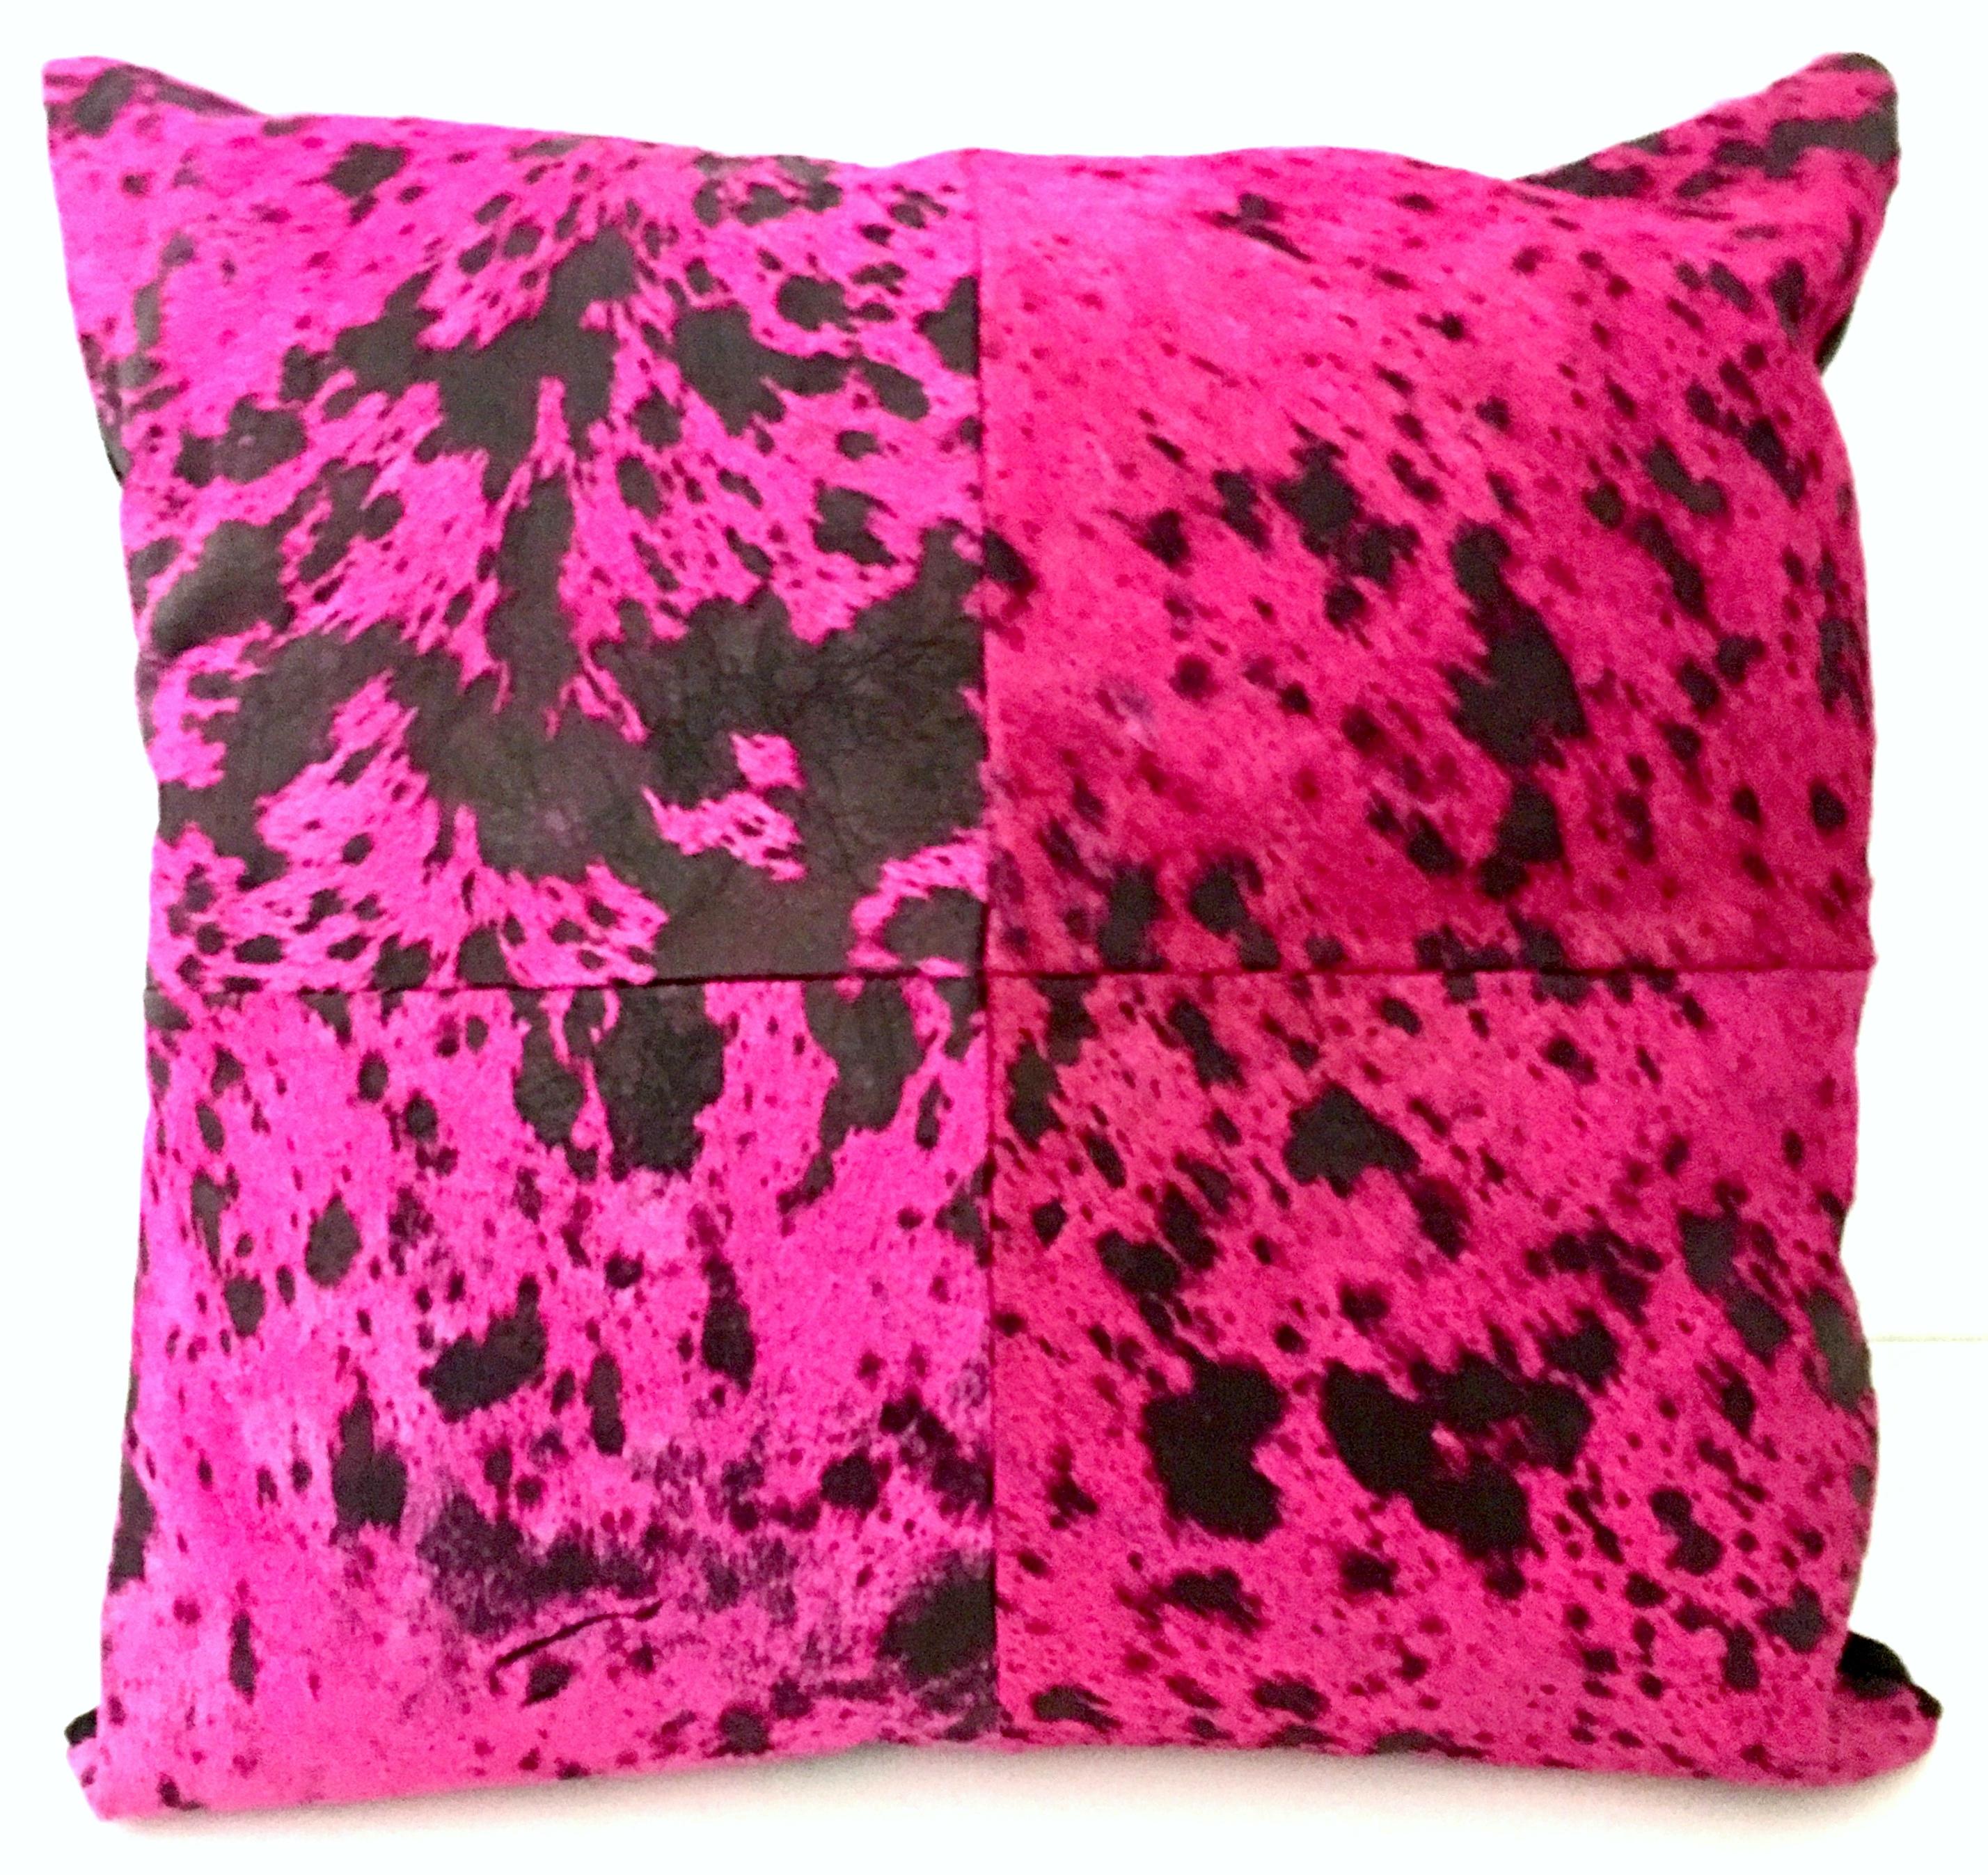 Contemporary 21st Century Pair of Fuchsia and Chocolate Brown Hide Hair Pillows